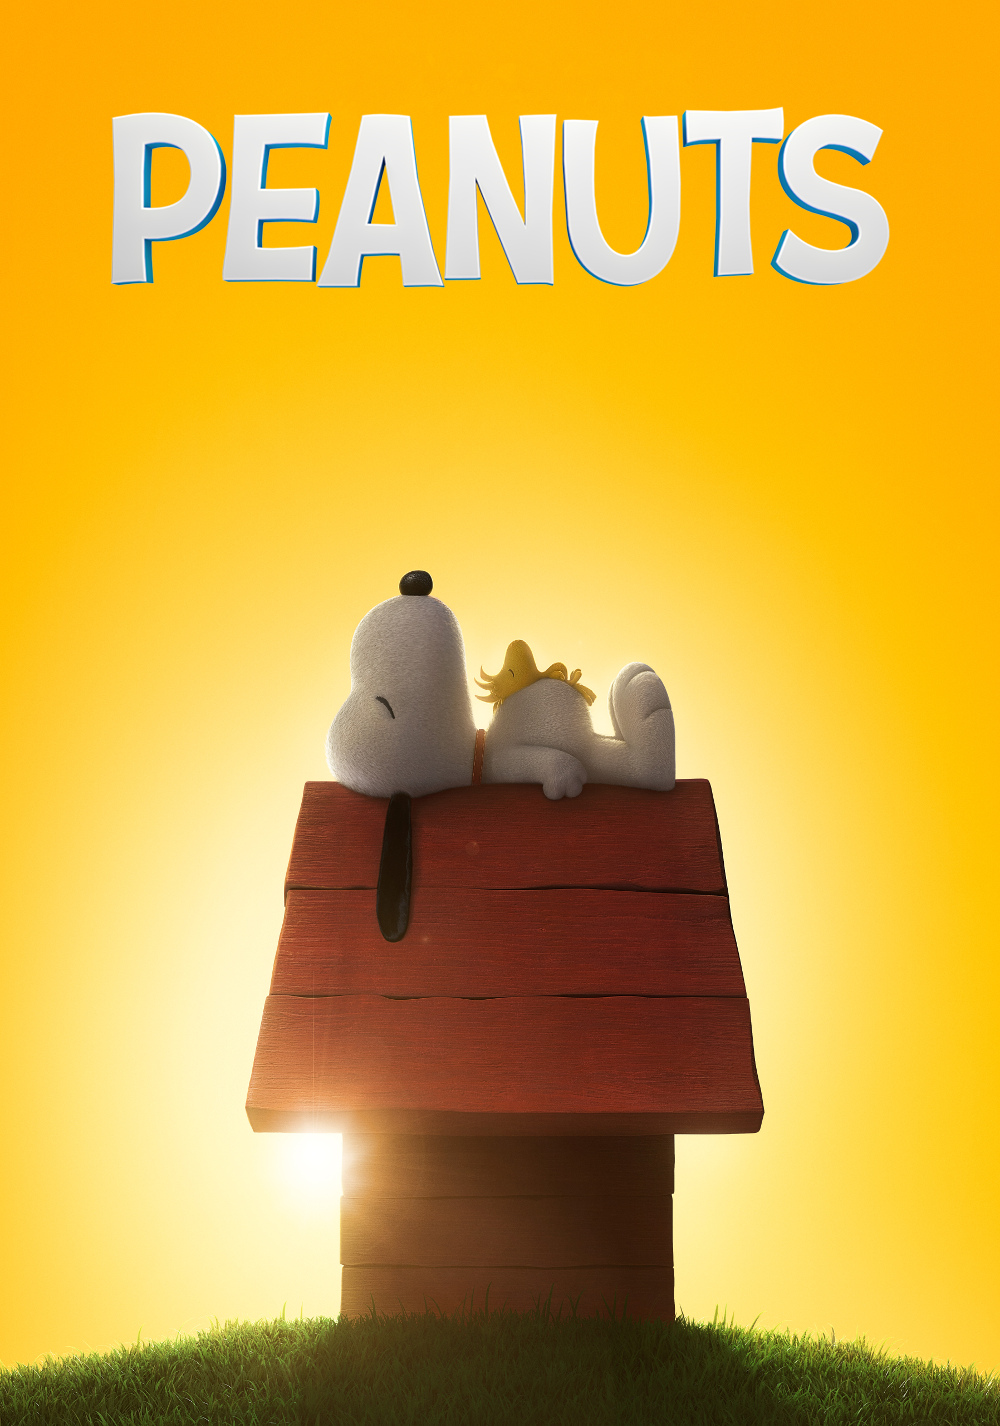 The Peanuts Movie Picture